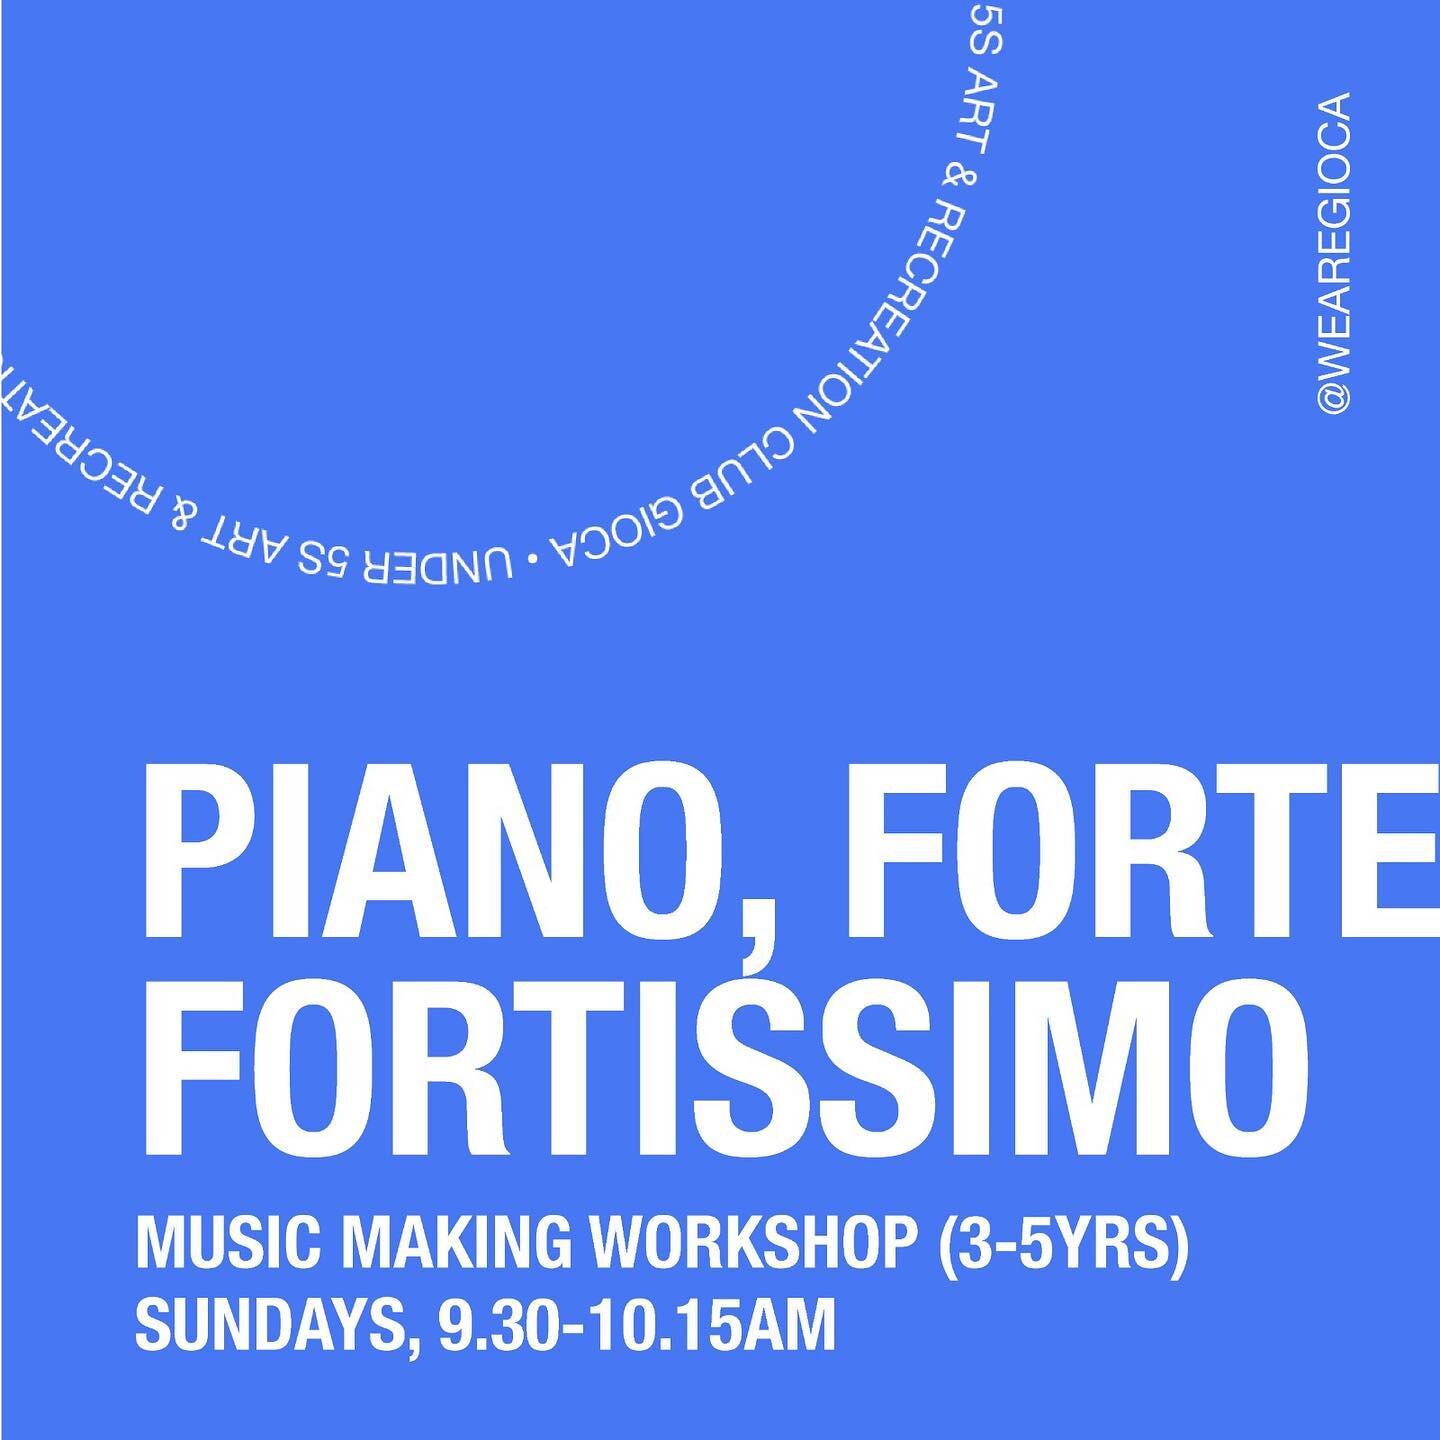 Time to make music! 🎵 

Our signature Sunday morning music making workshop is back, designed with slightly older kids (3-5yrs) in mind.

Piano, Forte, Fortissimo &mdash; Music Making Workshop (3-5yrs) recognises the importance of music 🎹 in early y